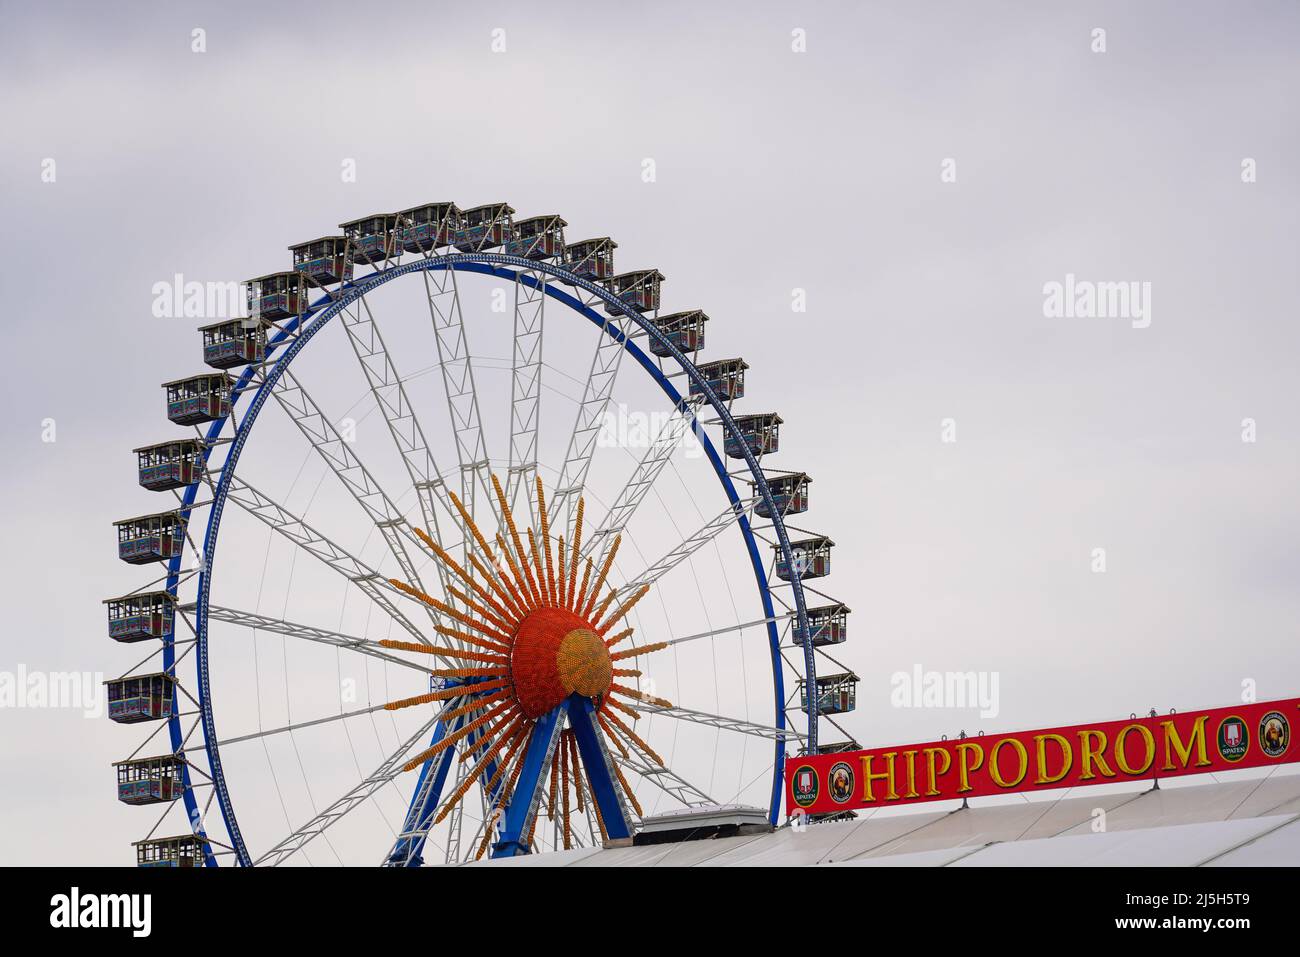 Beautiful shot of a Fairground with Ferris wheel and a billboard for the Hippodrom beer tent at the Munich Spring Festival 2022 on the Theresienwiese. Stock Photo